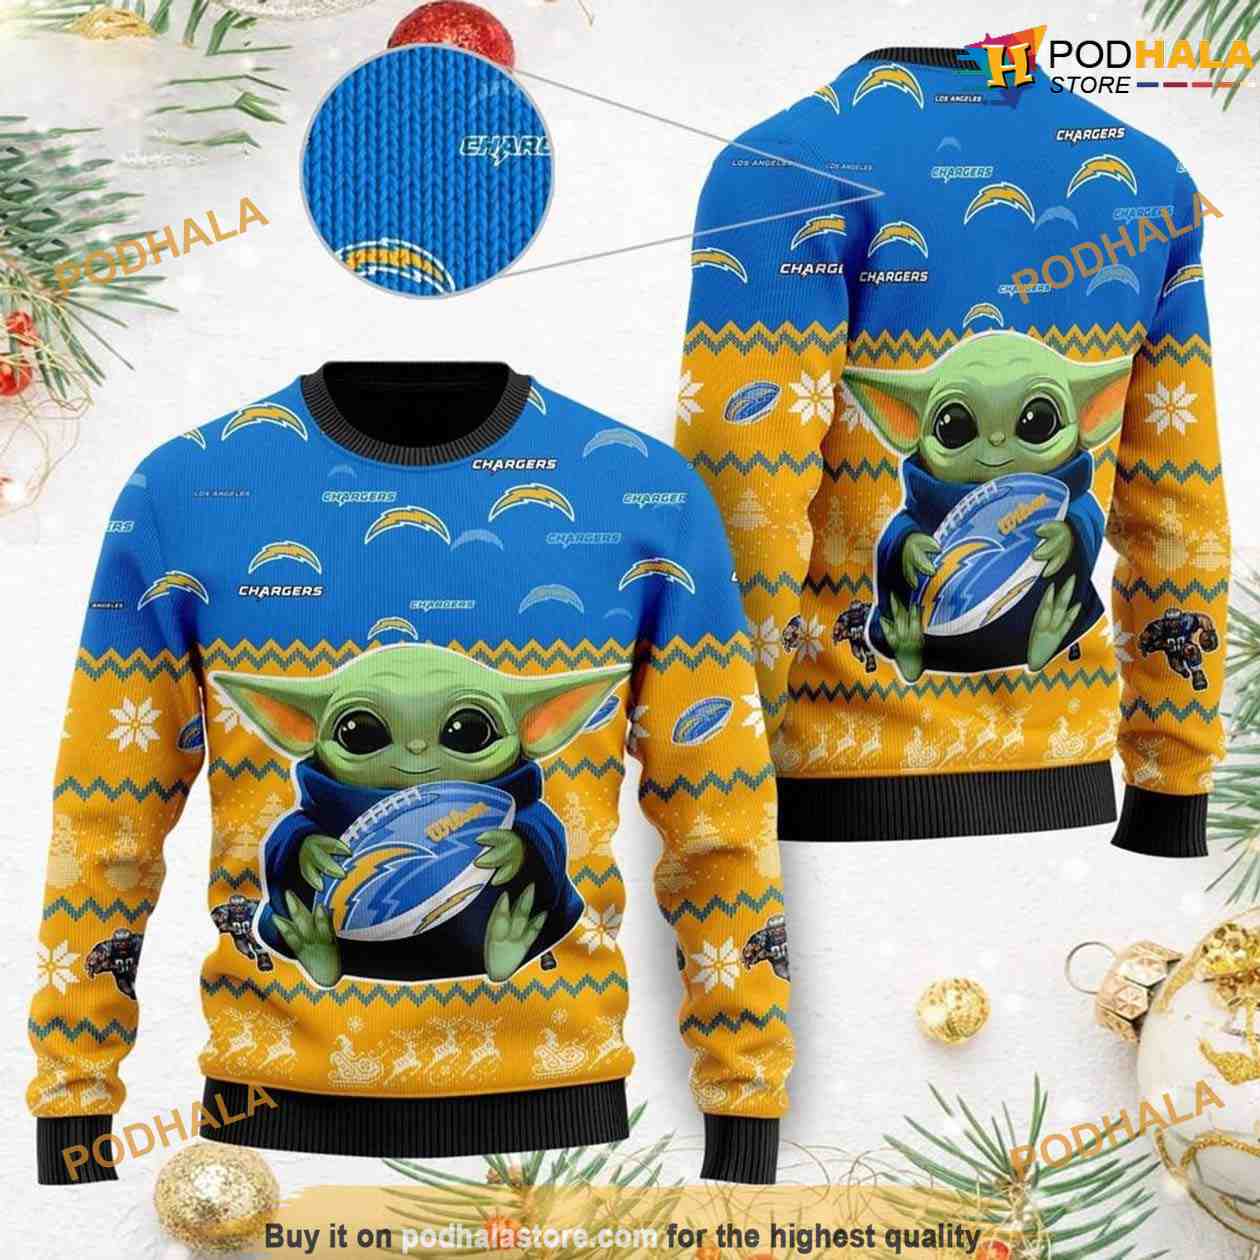 Los Angeles Chargers CUSTOM Christmas Sweater 